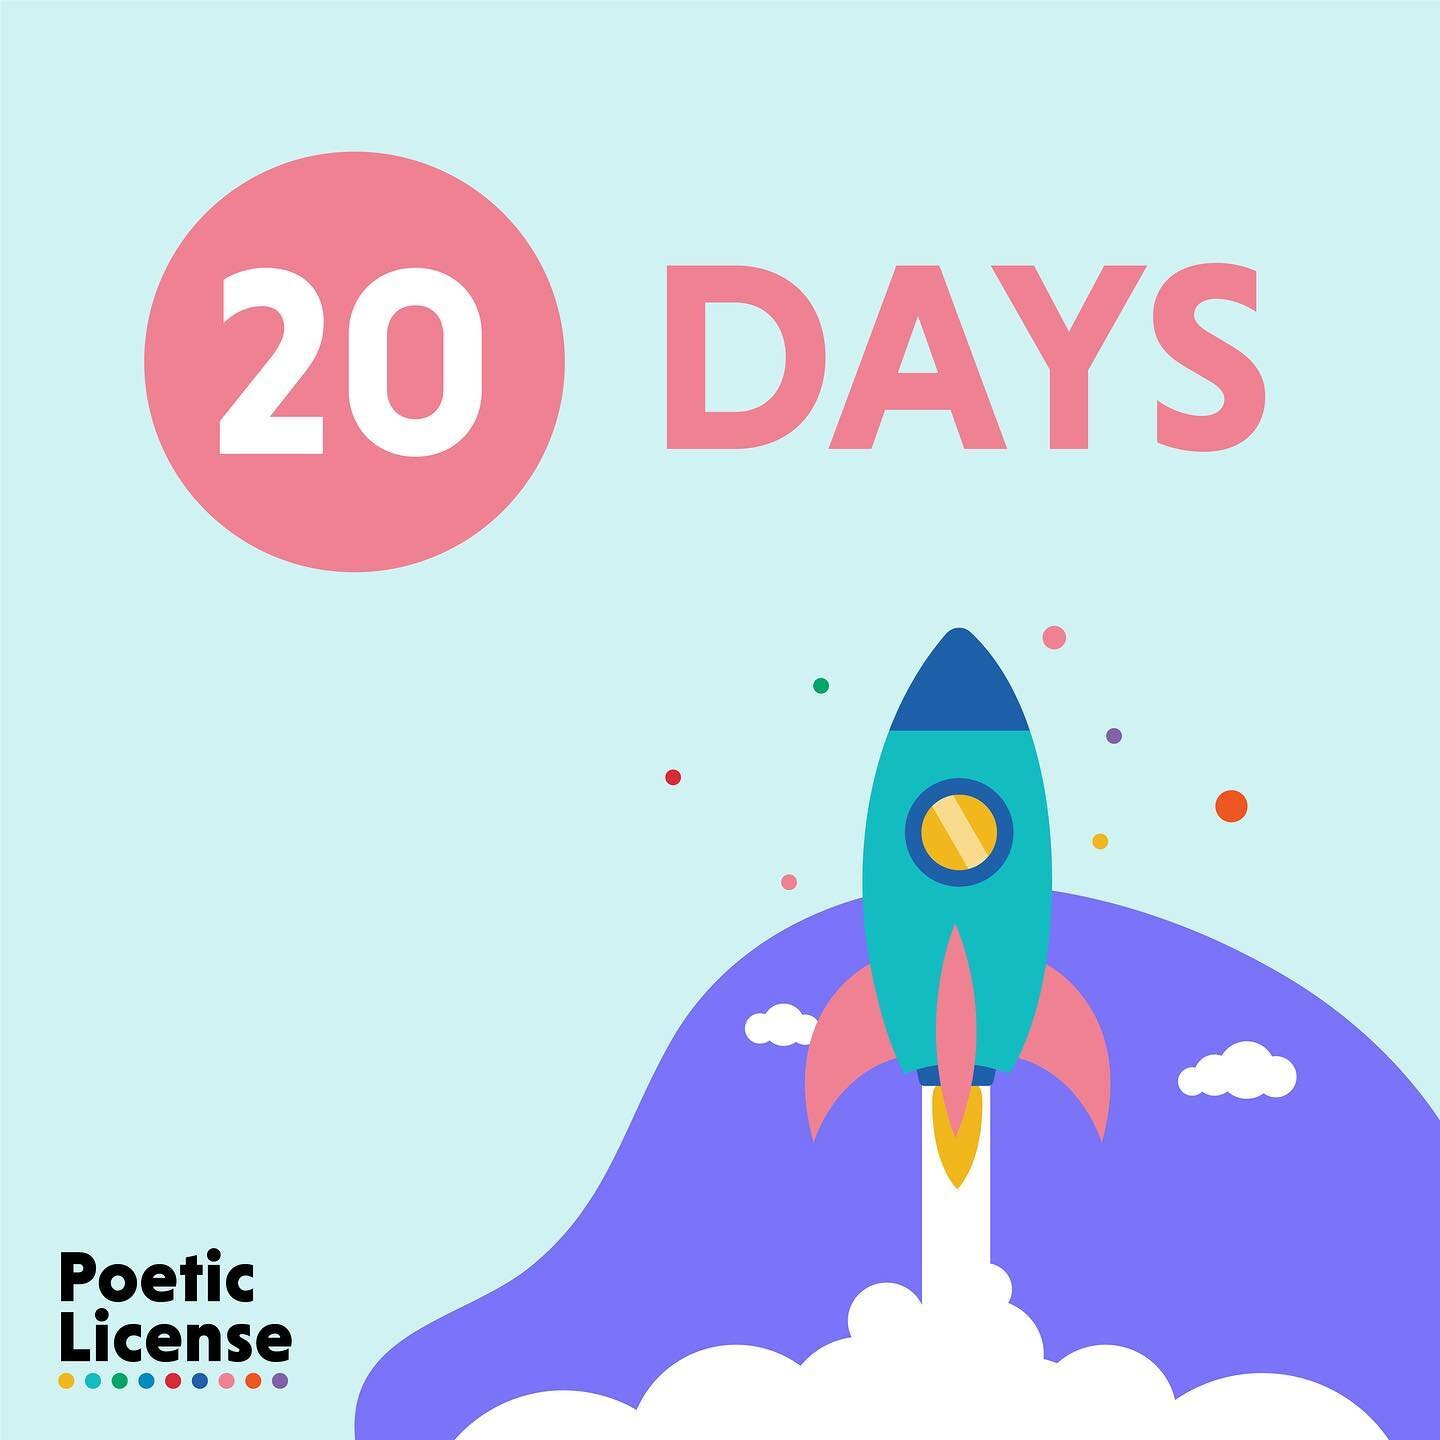 There are just 20 DAYS left until the Poetic License Kickstarter launch! Are you signed up to be notified when we go live? If not, click the link in our bio!
&bull;
#kickstarter #kickstarterboardgames #kickstarterproject #kickstartercampaign #kicksta